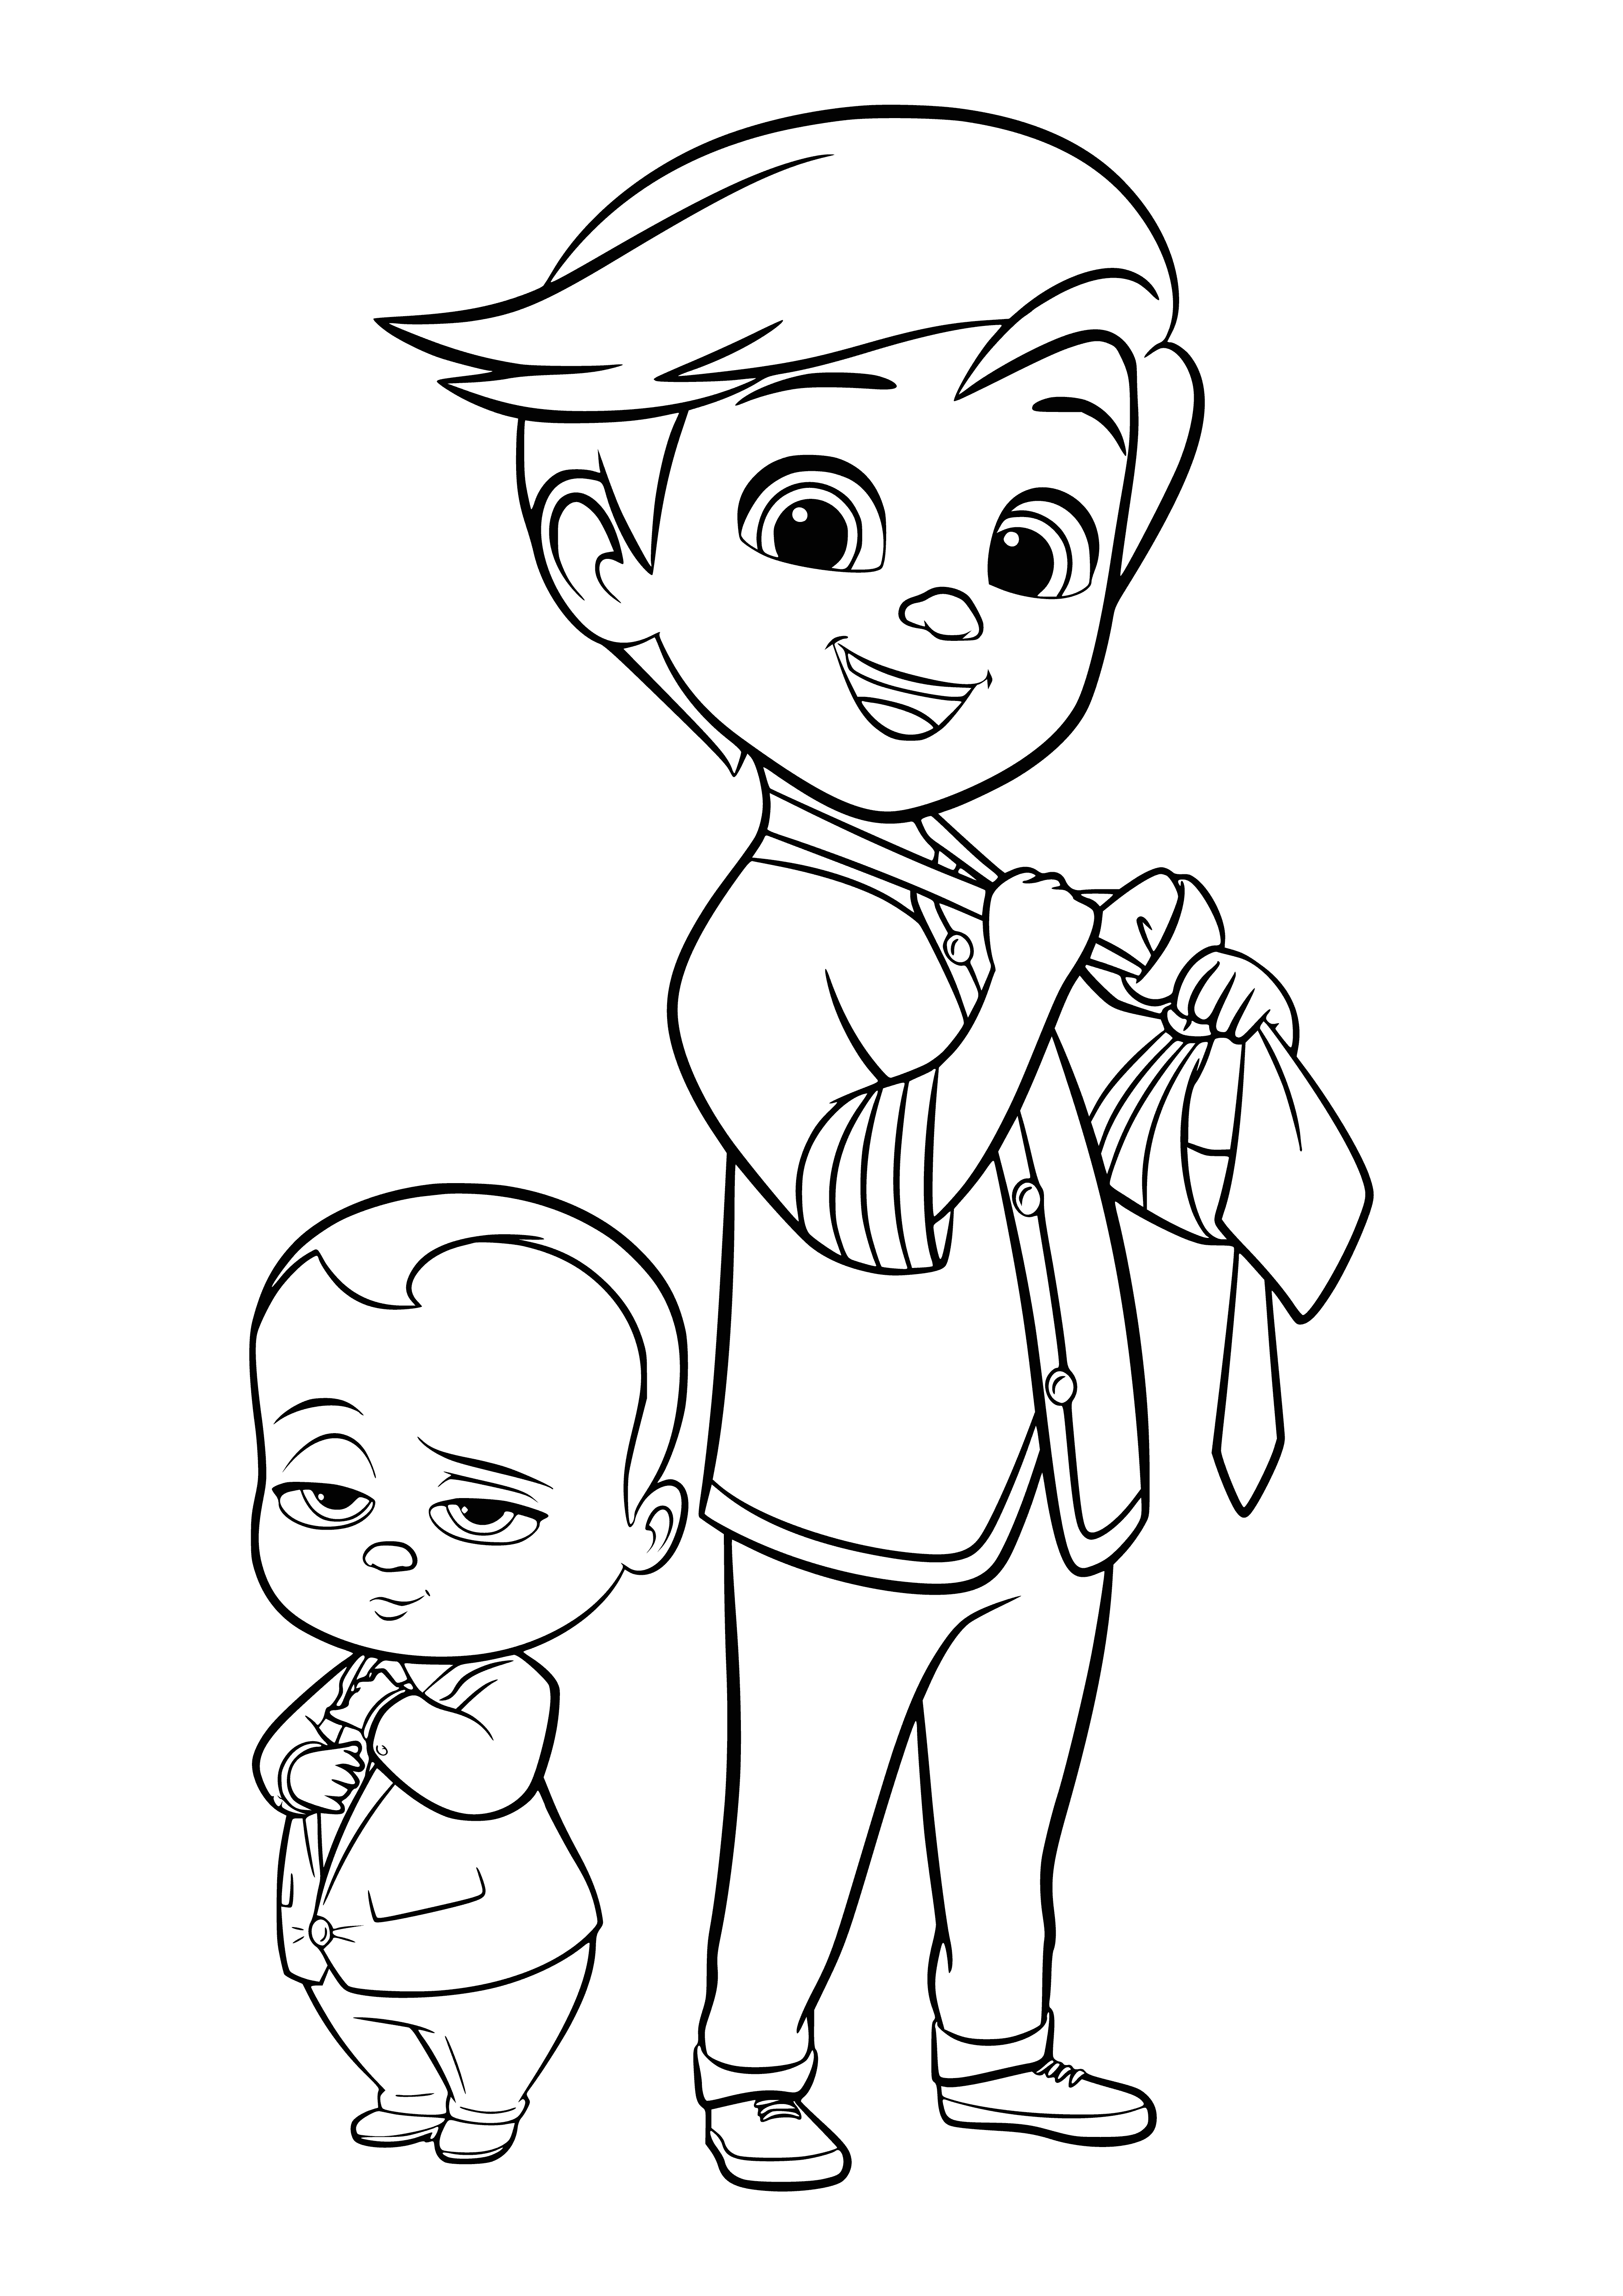 coloring page: Tim and Baby Boss team up with a bib and a suit - to ensure a happy future full of milk! #BossBaby